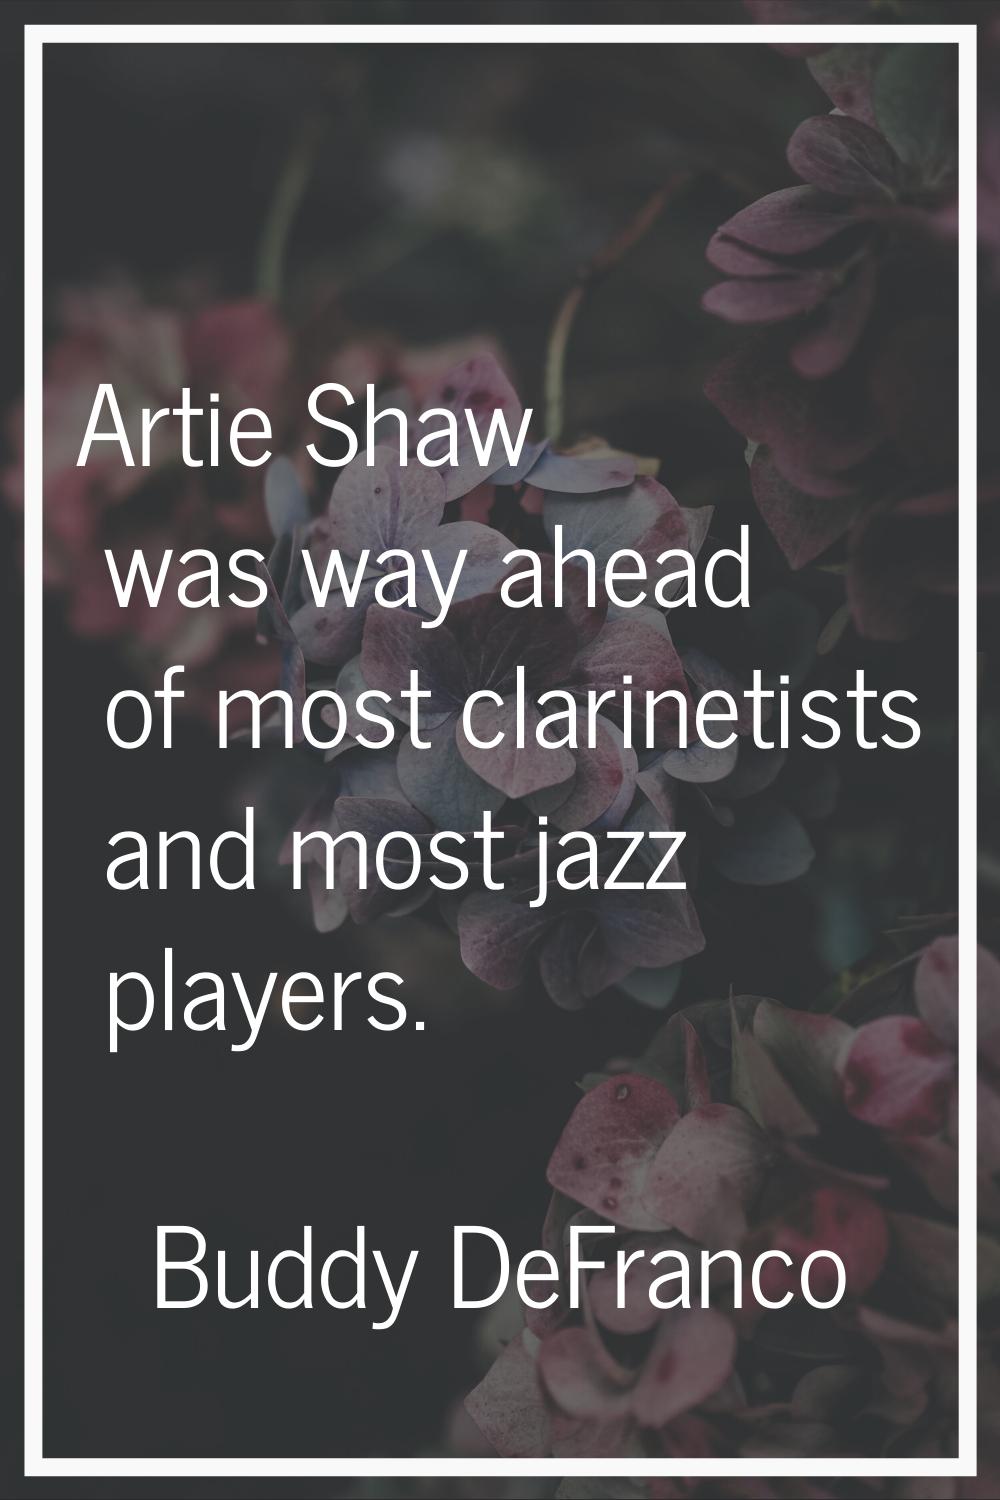 Artie Shaw was way ahead of most clarinetists and most jazz players.